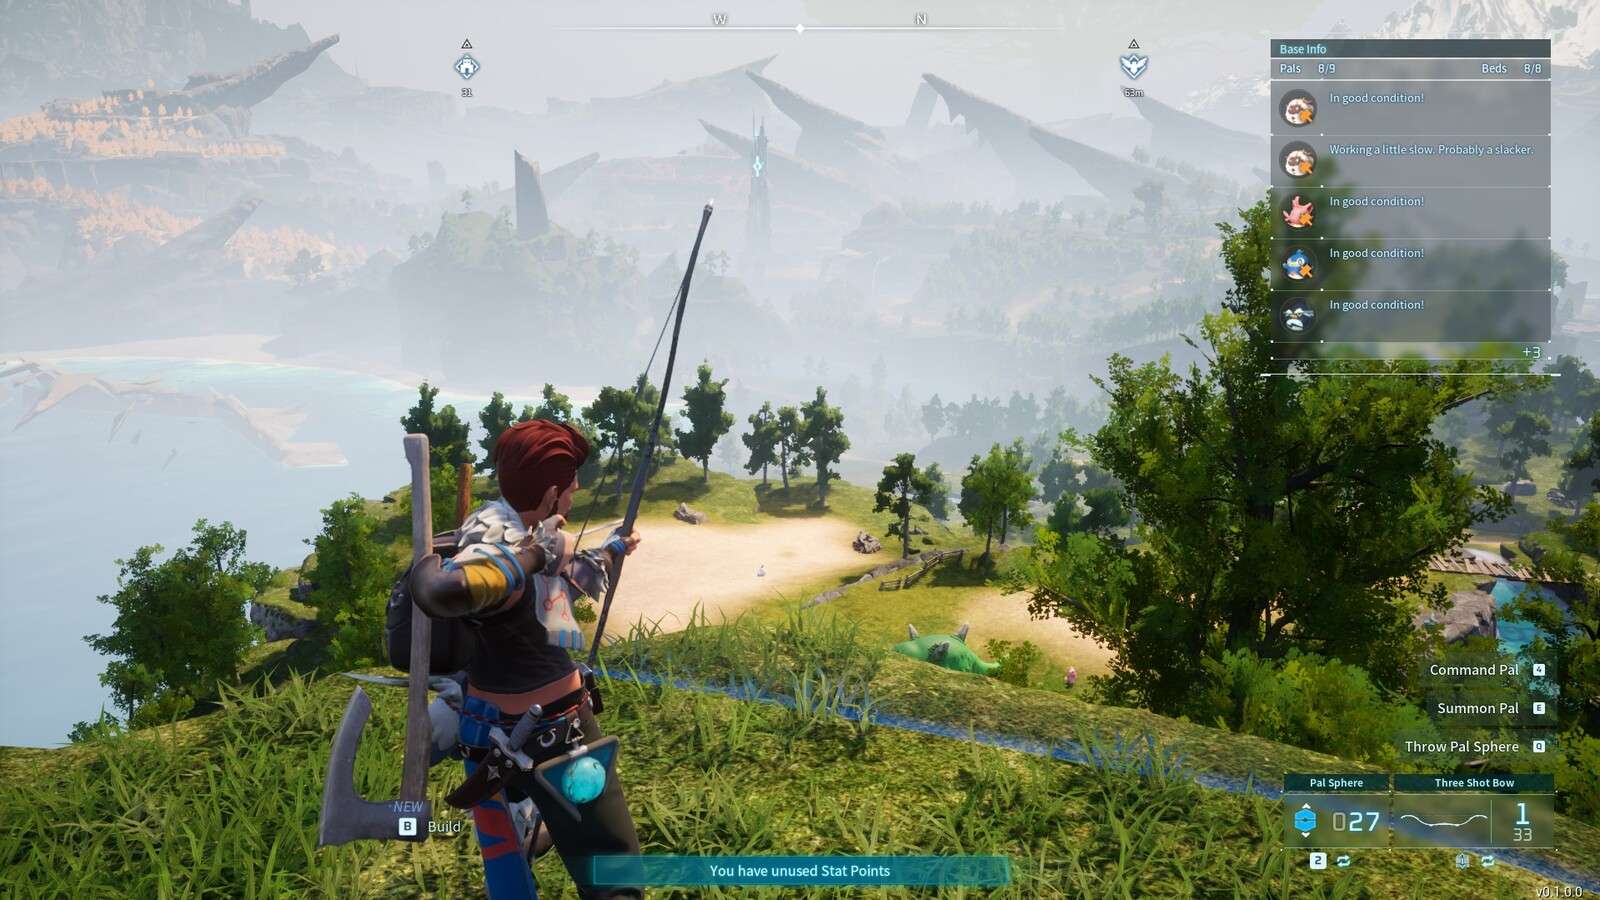 A player fires a bow in Palworld